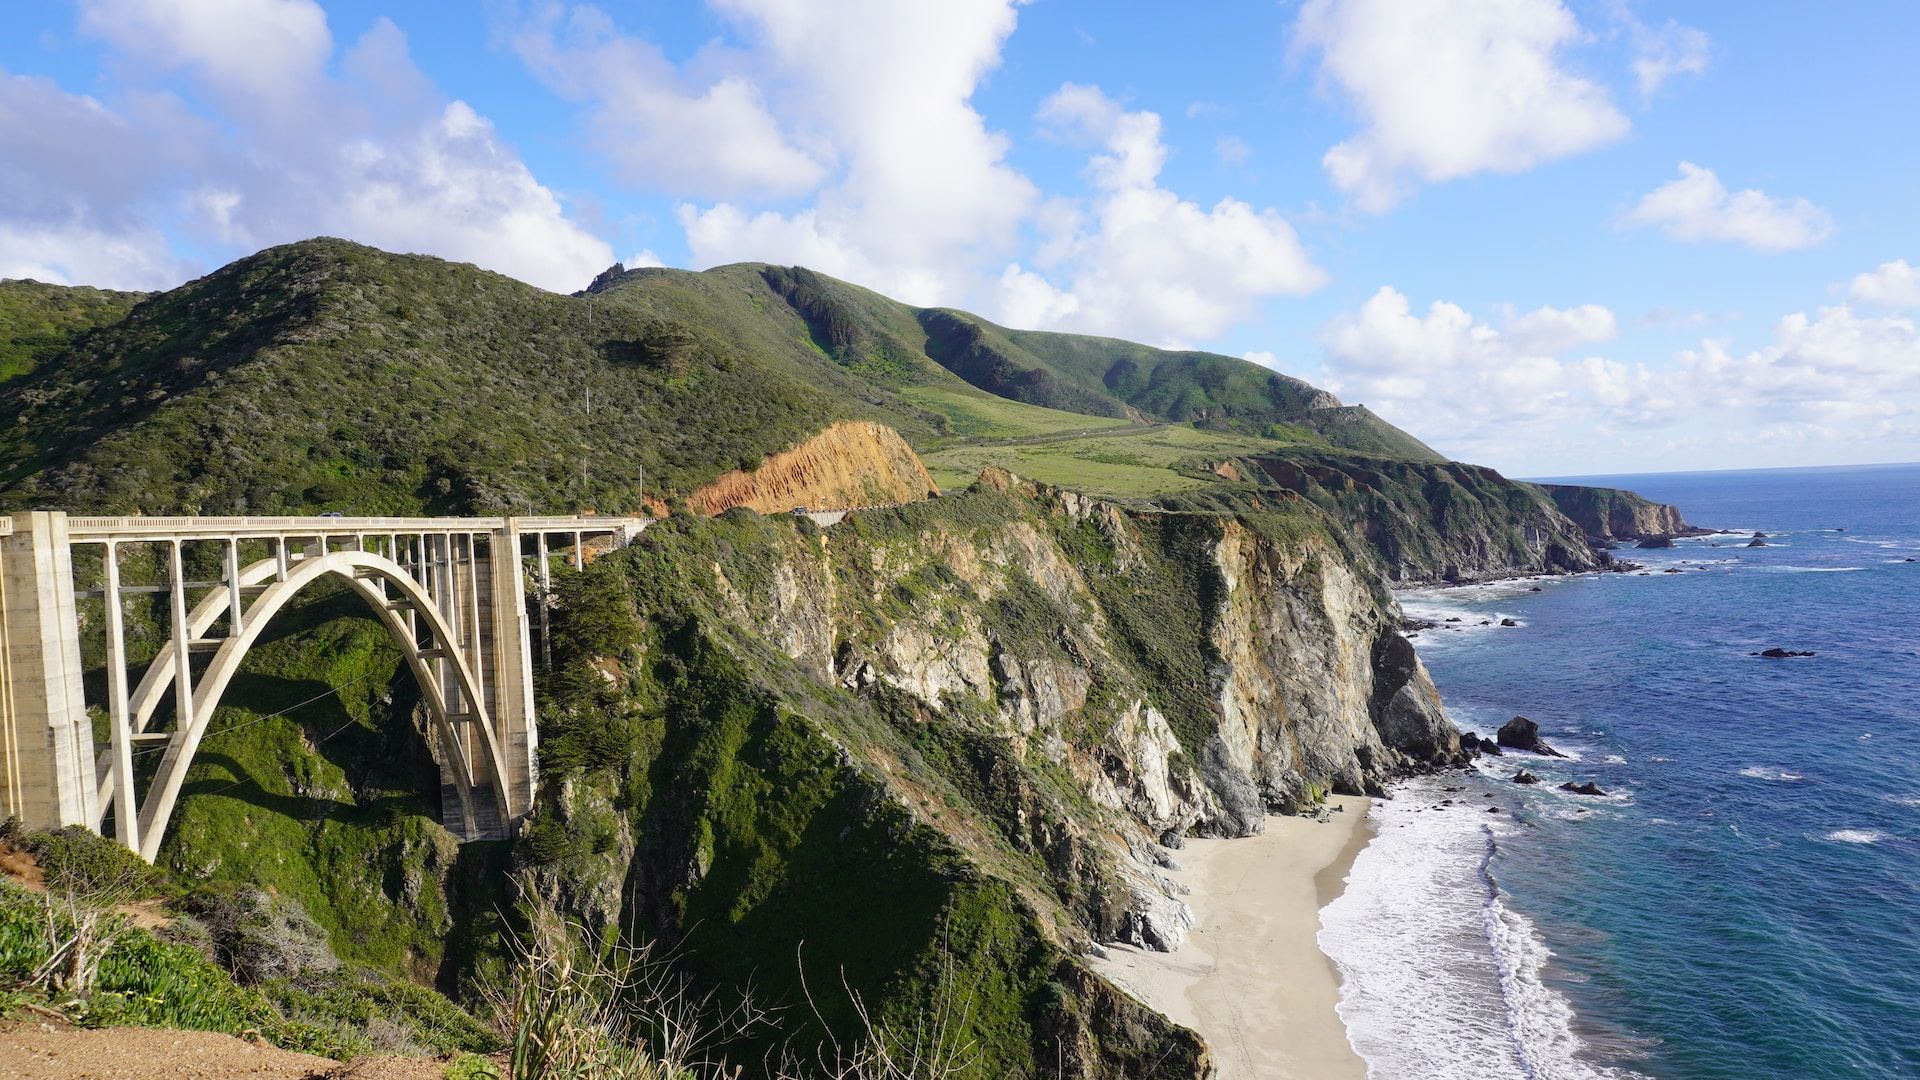 Route 1, Pacific Coast Highway, California 